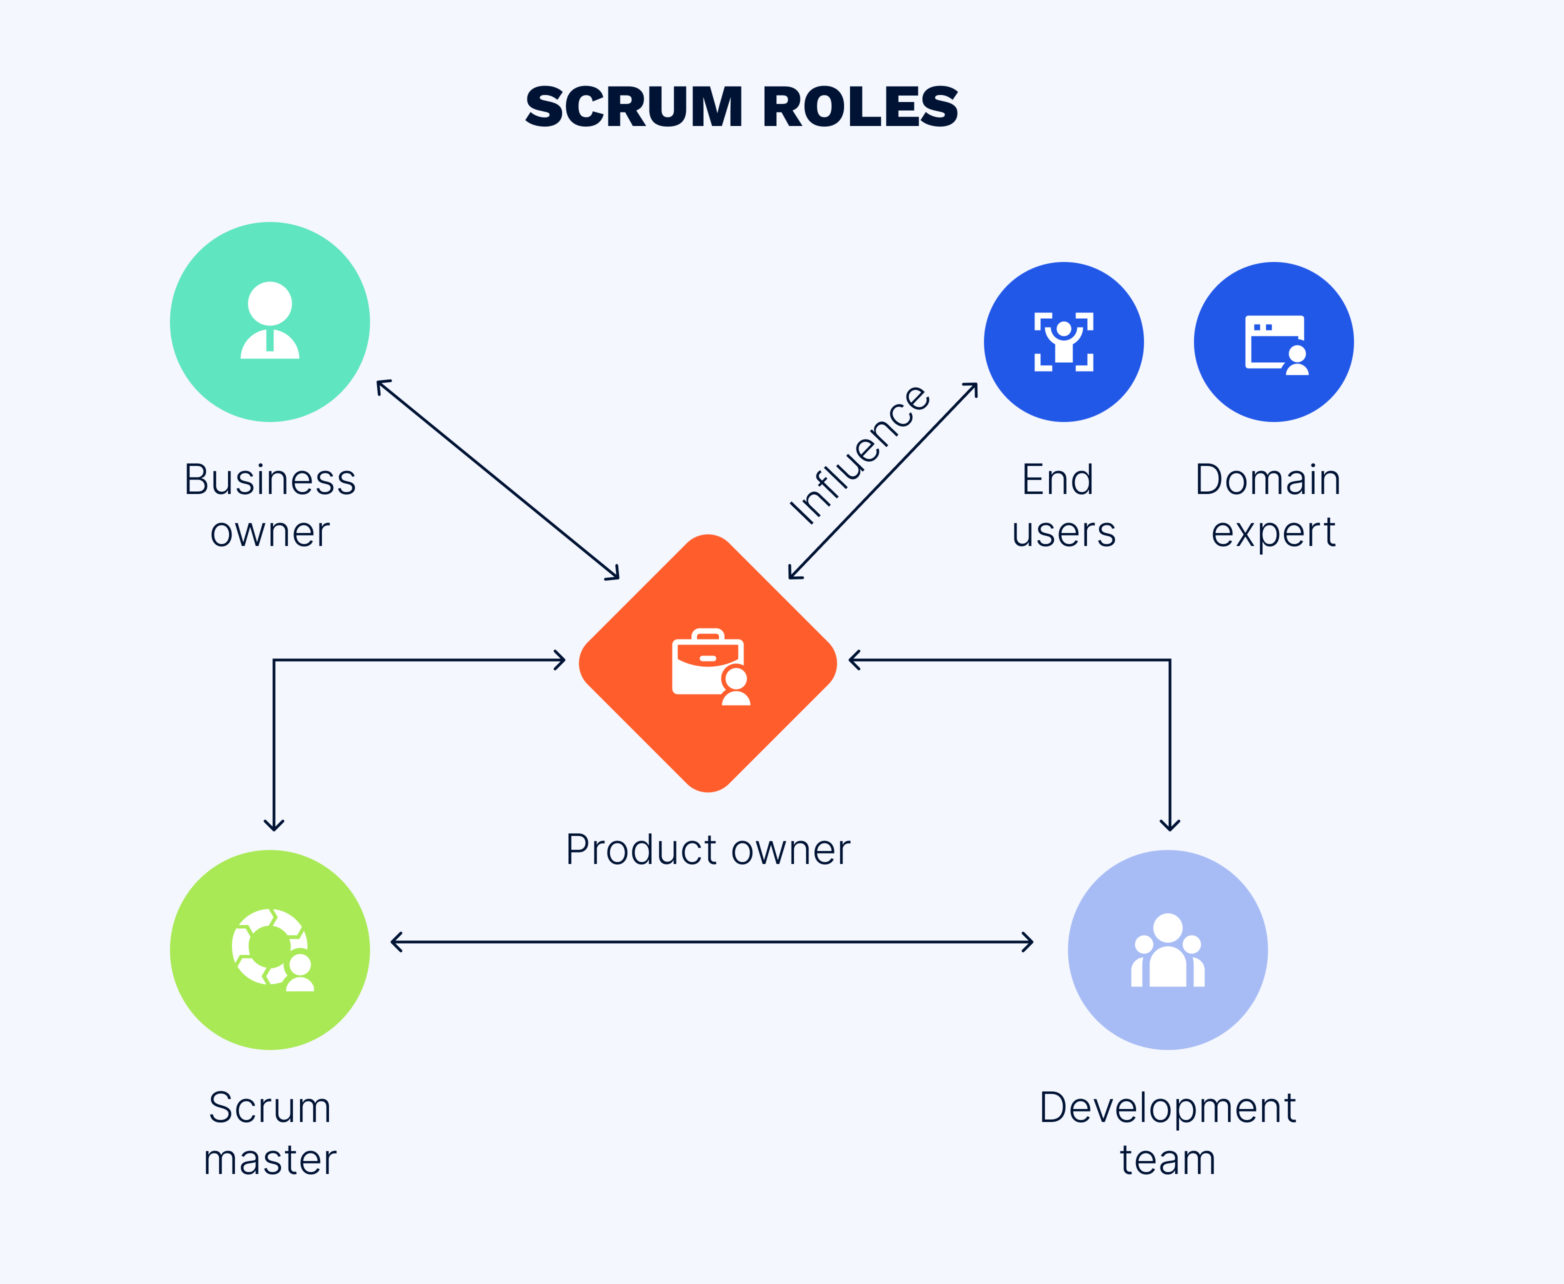 The Scrum team roles and responsibilities